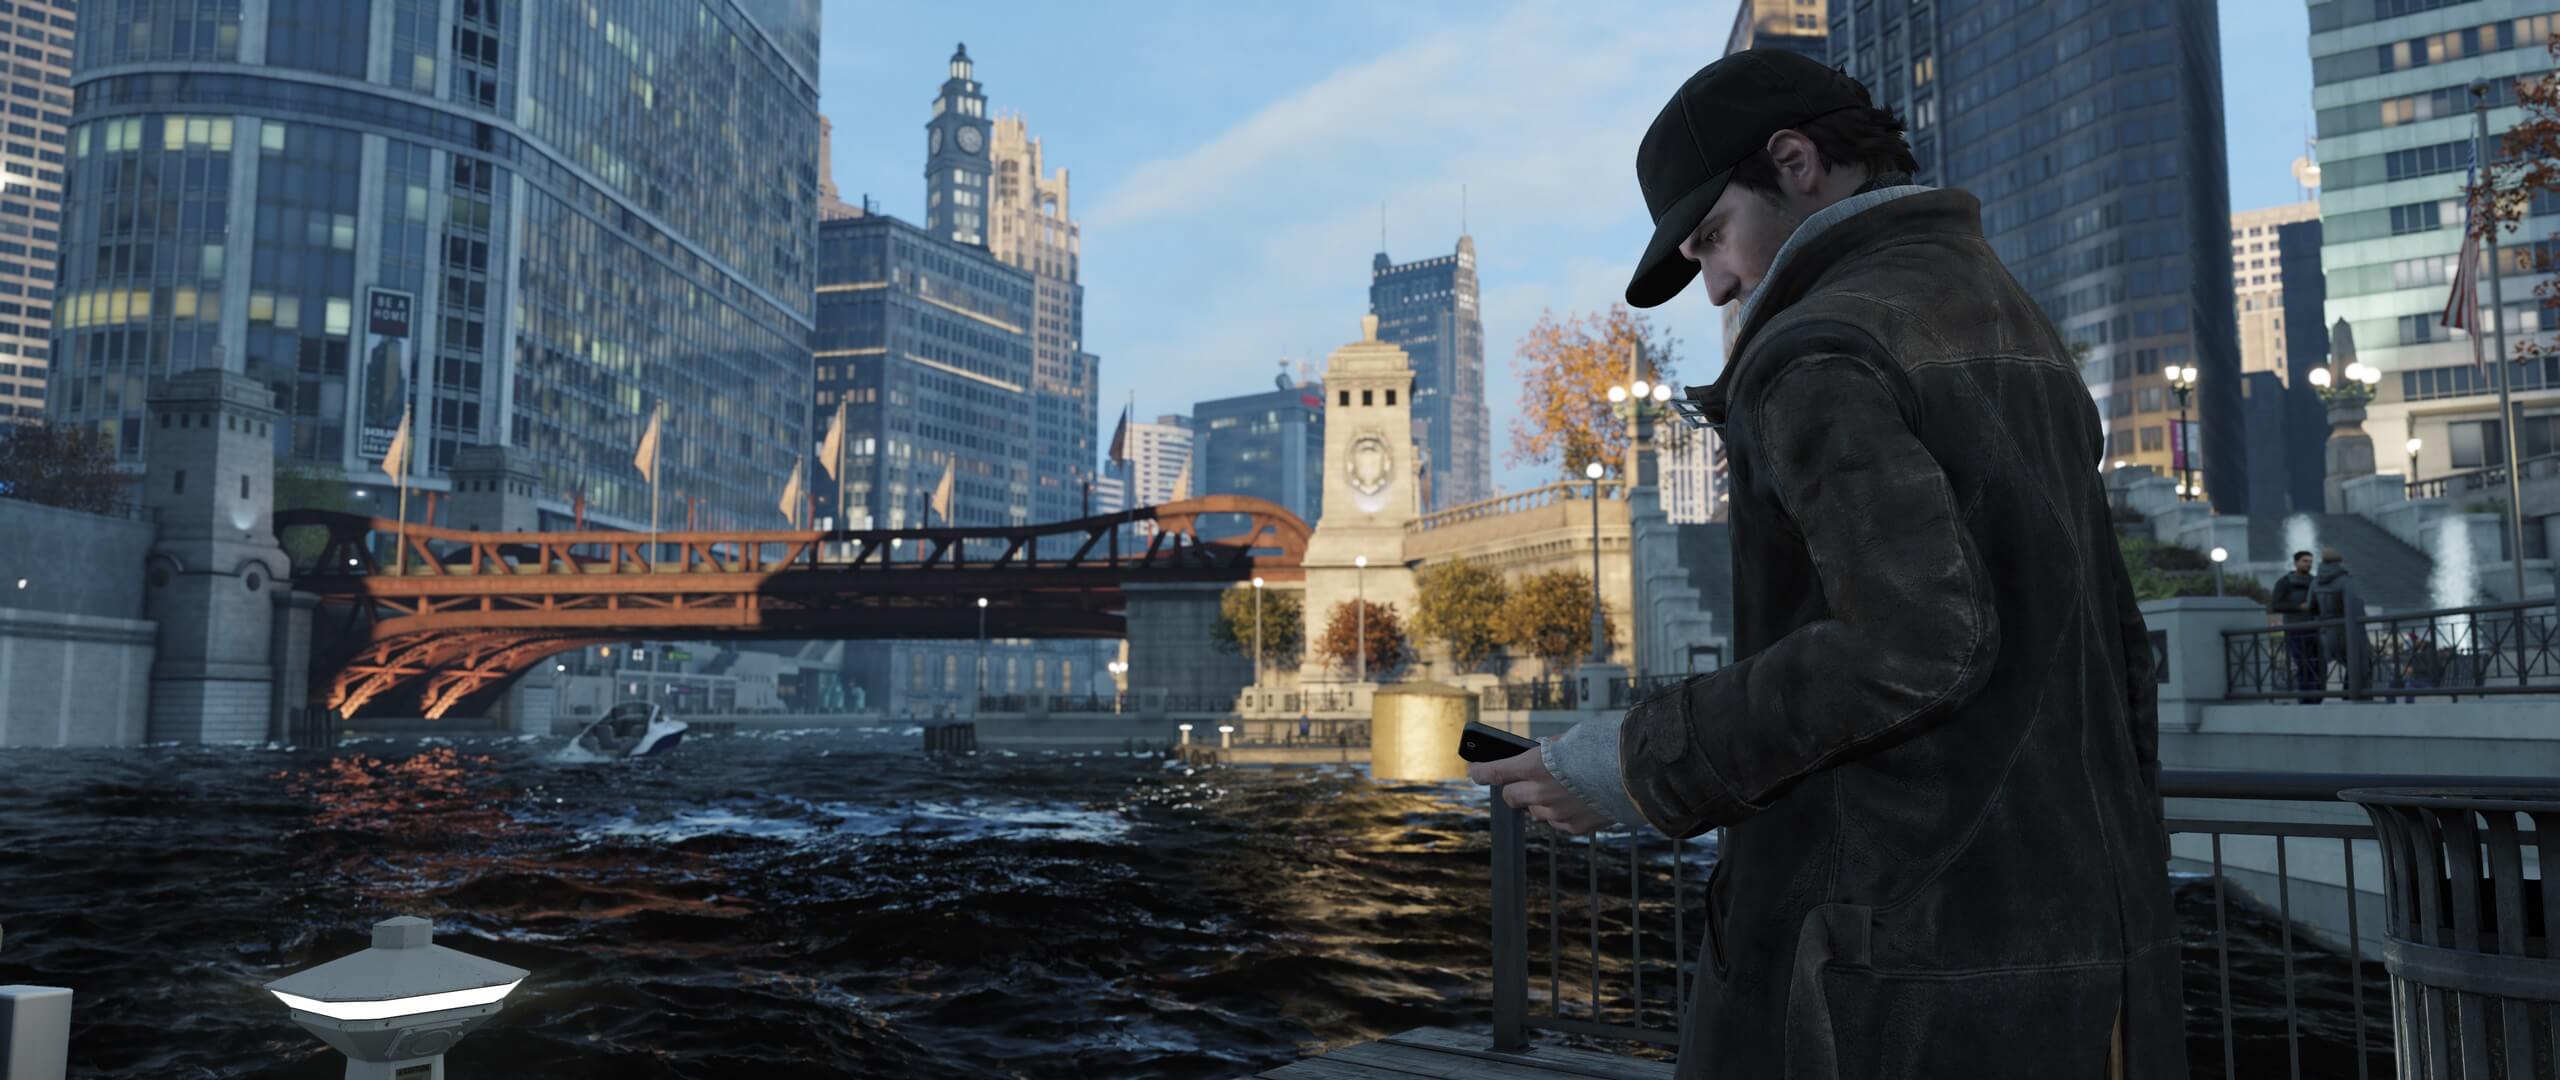 Watch Dogs Gets Massive 'Living_City' Mod with New Features